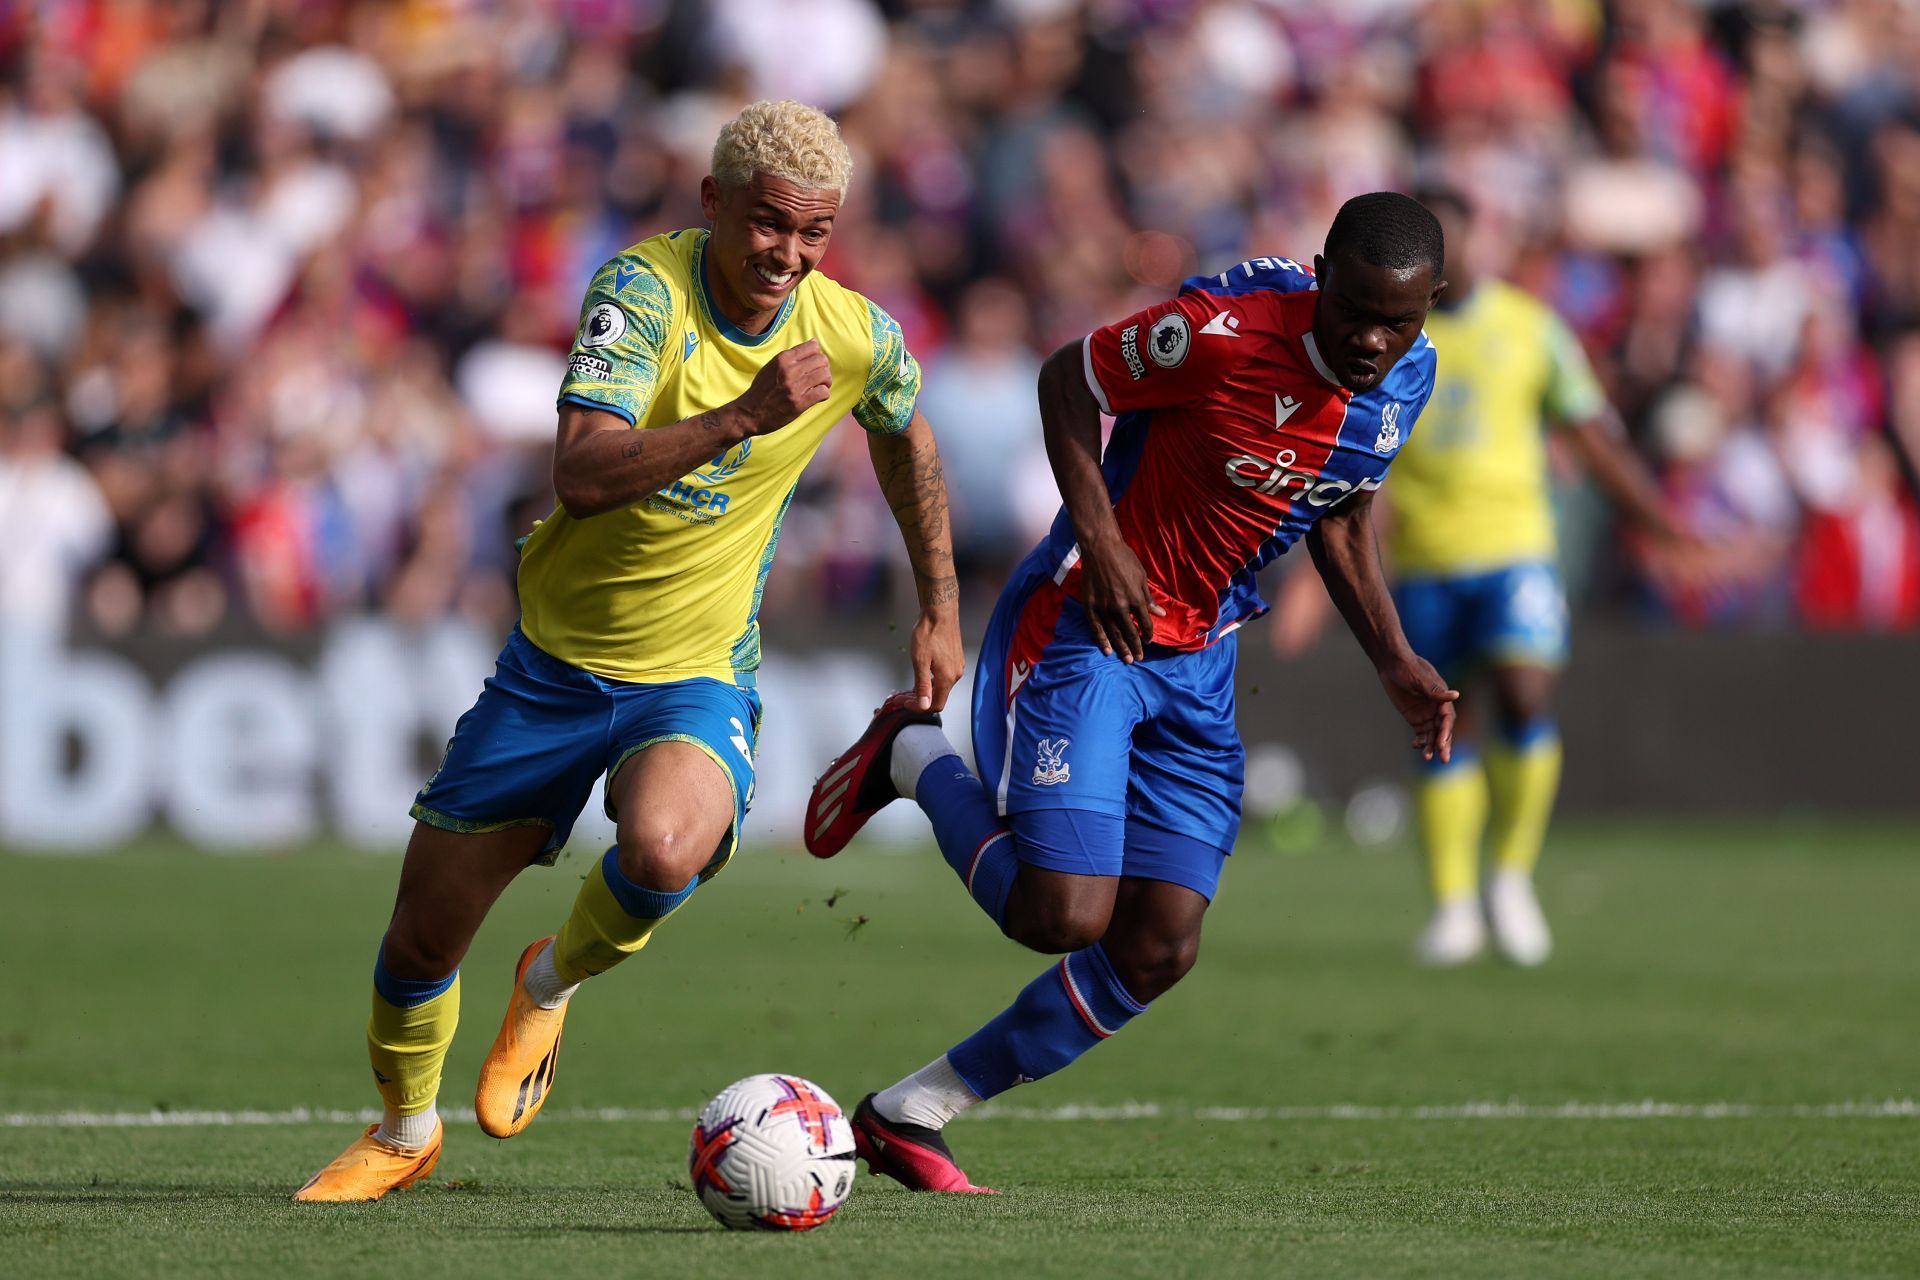 Crystal Palace take on Nottingham Forest this week